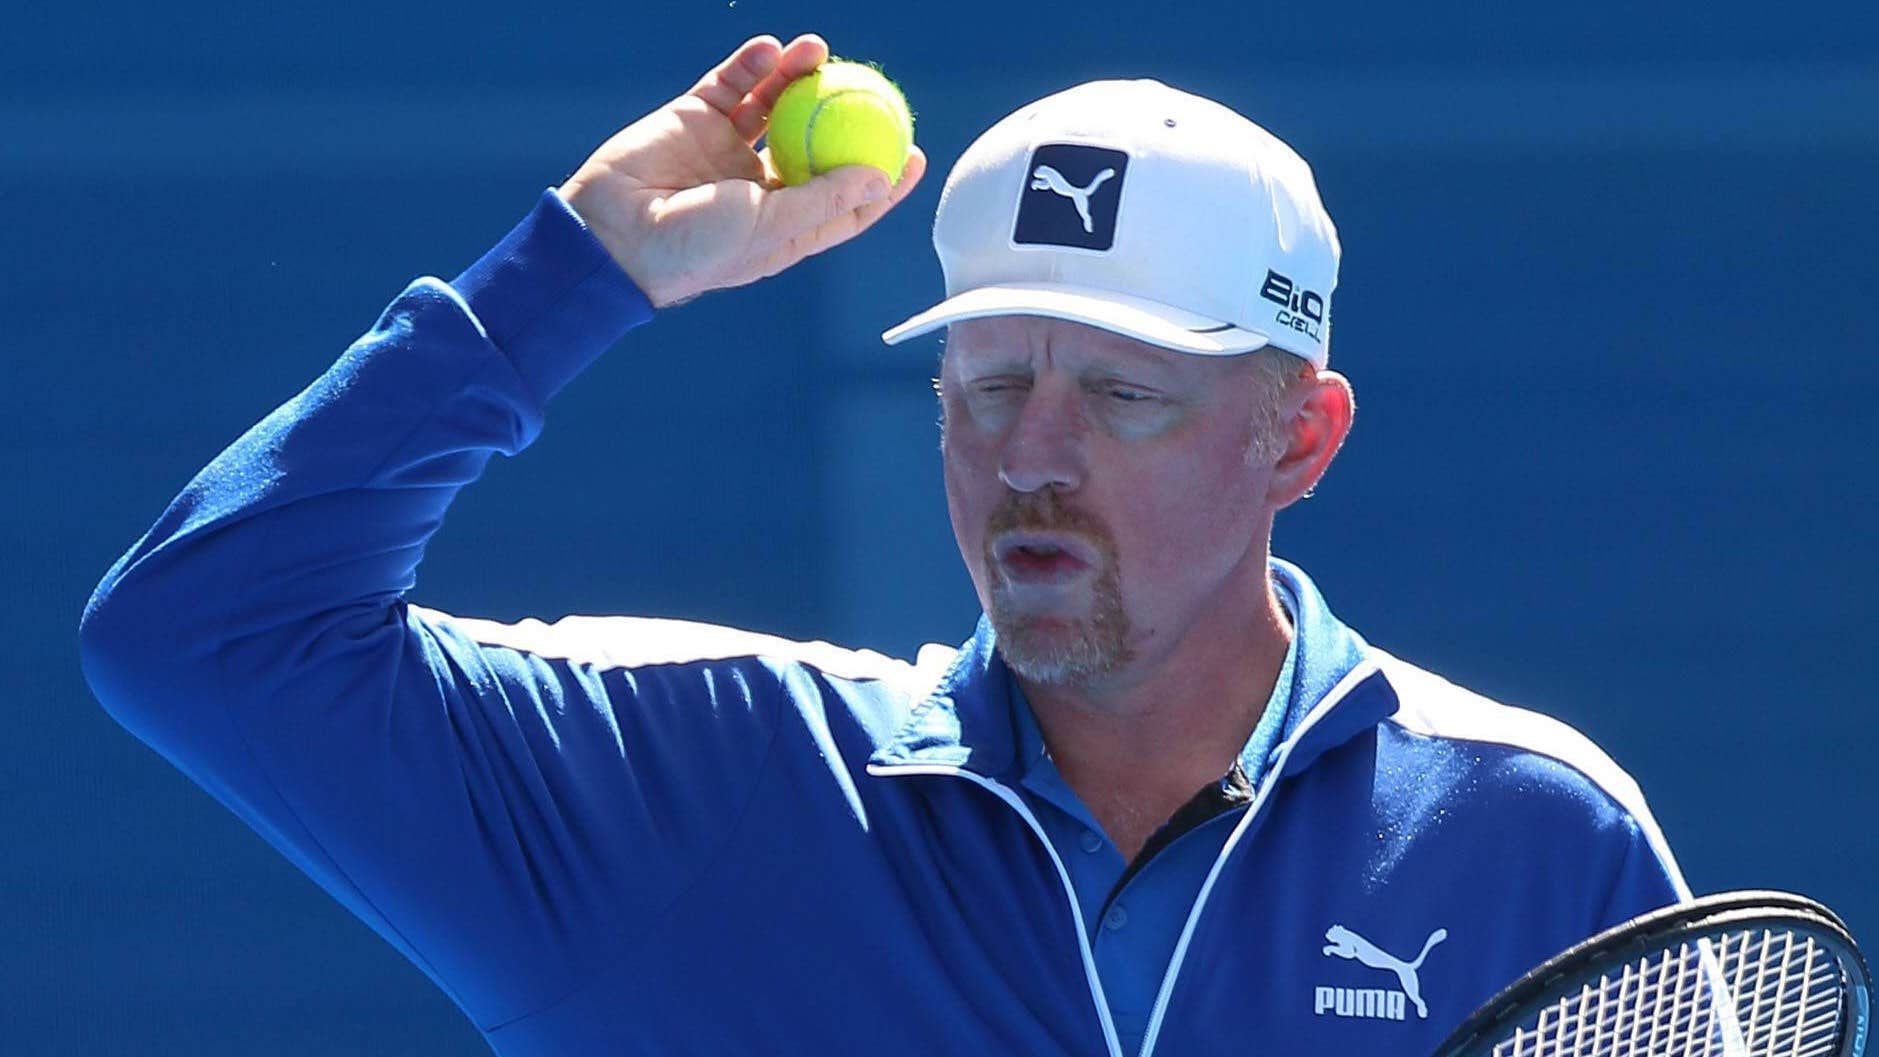 Boris Becker has been banned from entering the UK after his new job |  Tennis